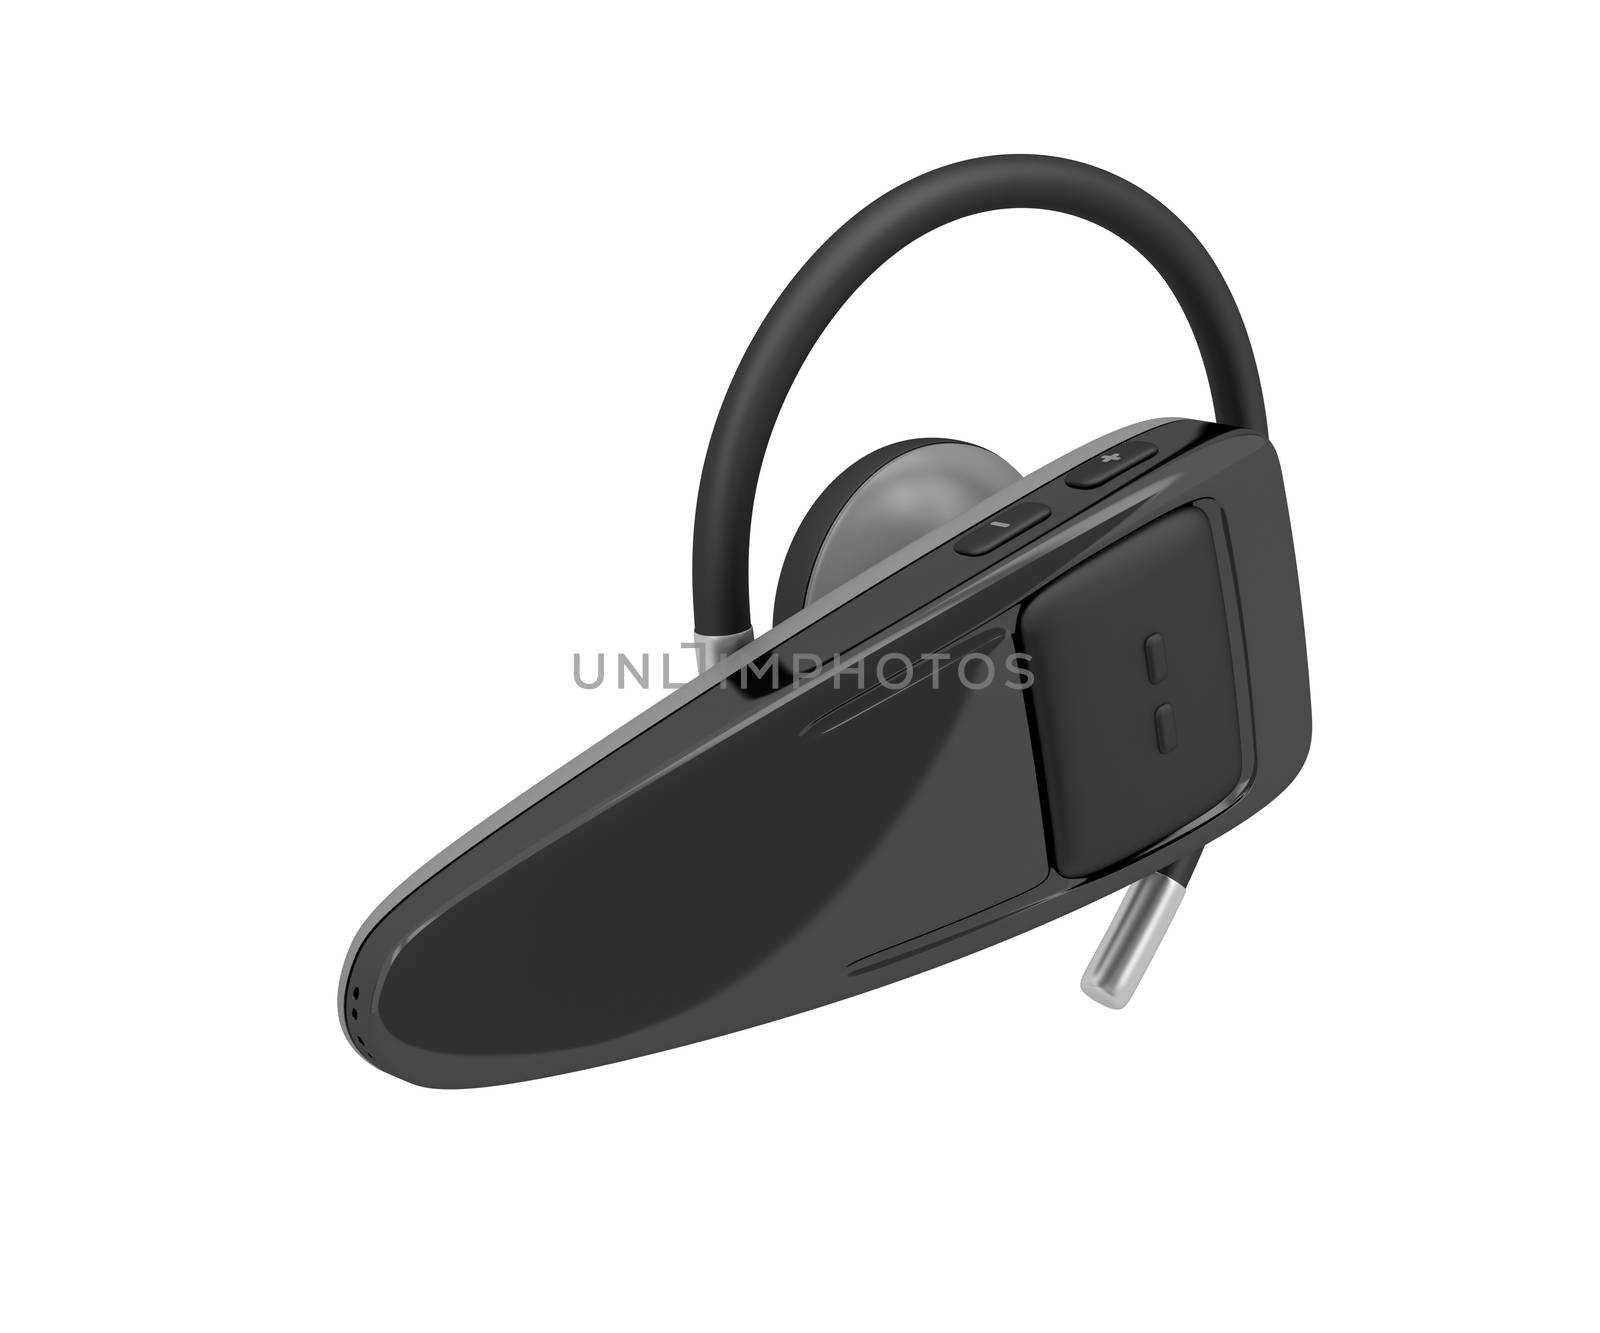 Bluetooth headset isolated on a white background